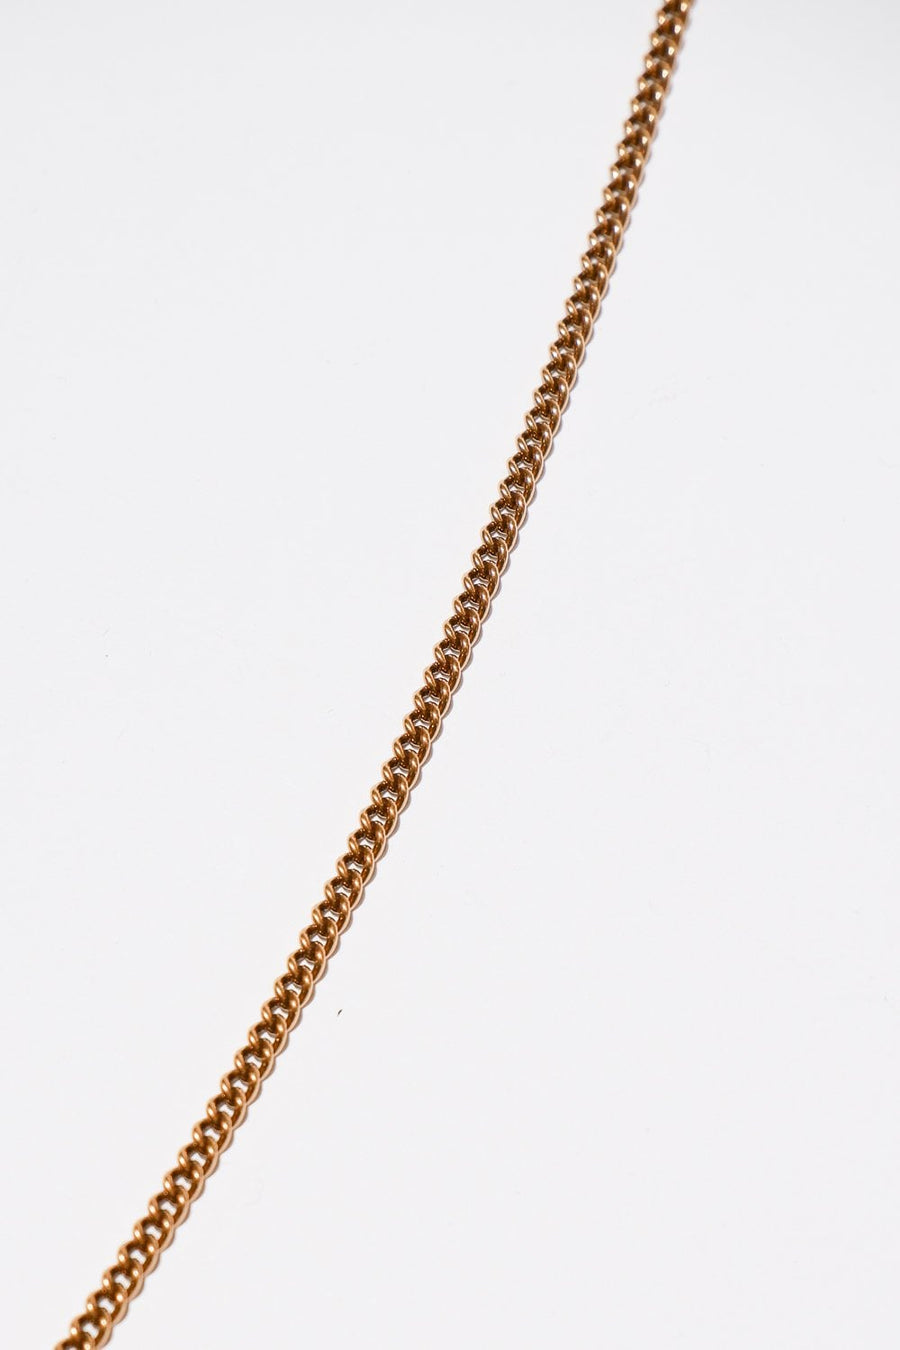 Buy the GOTI Plating Necklace AG CN2116 Gold at Intro. Spend £50 for free UK delivery. Official stockists. We ship worldwide.